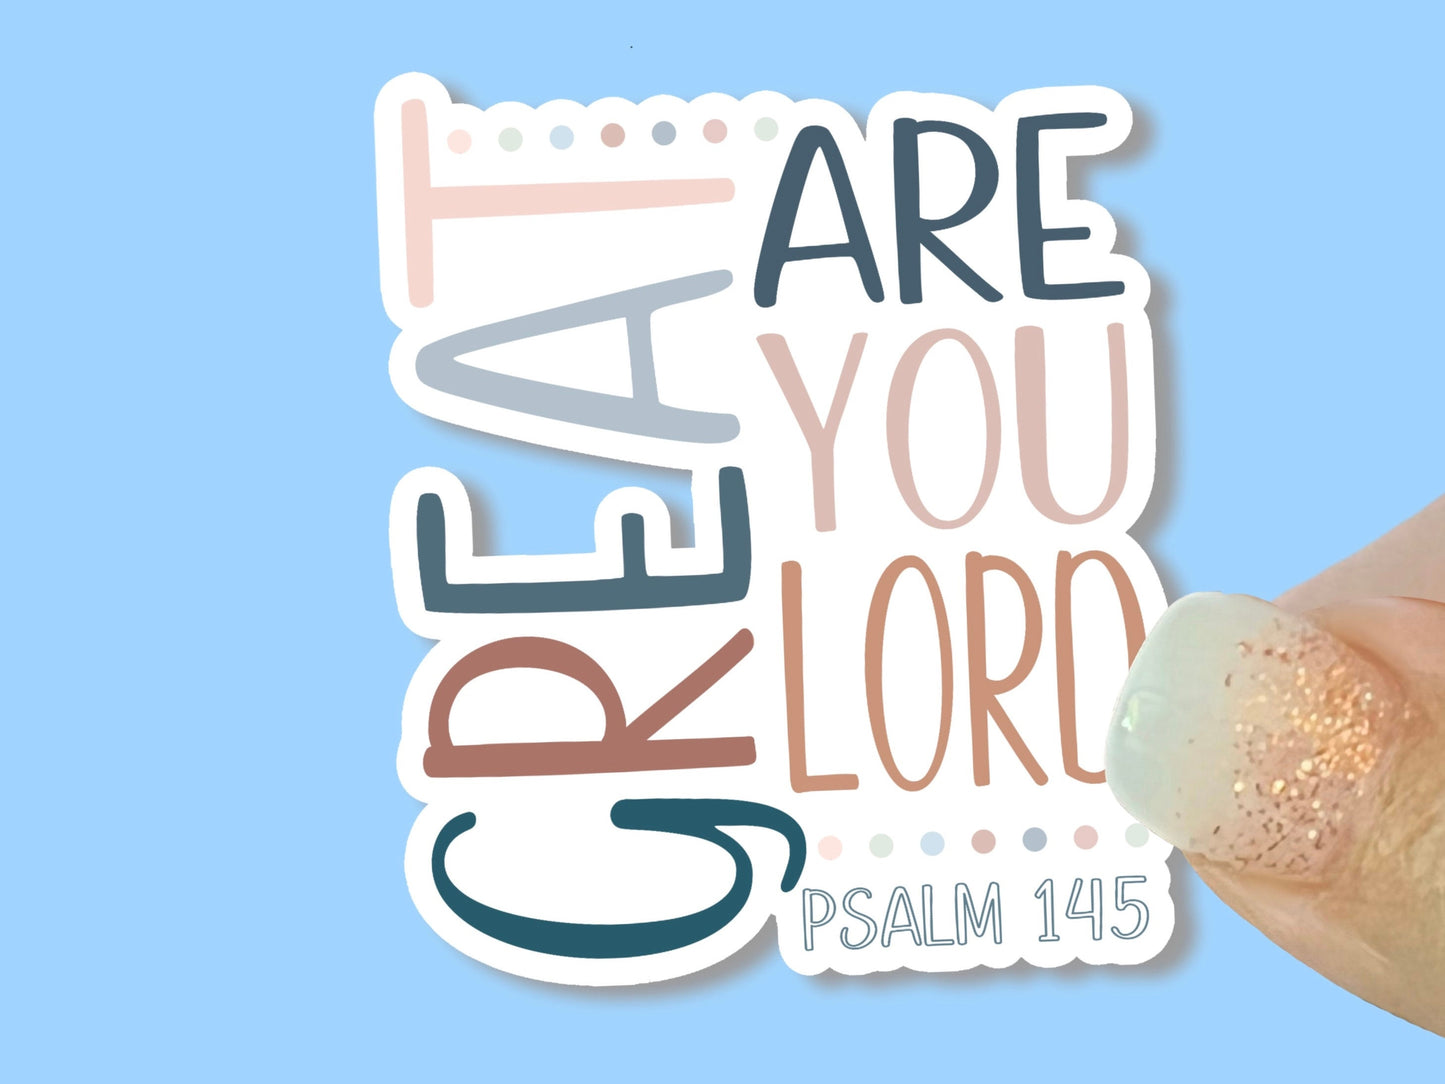 Great are you Lord, Christian Faith UV/ Waterproof Vinyl Sticker/ Decal- Choice of Size